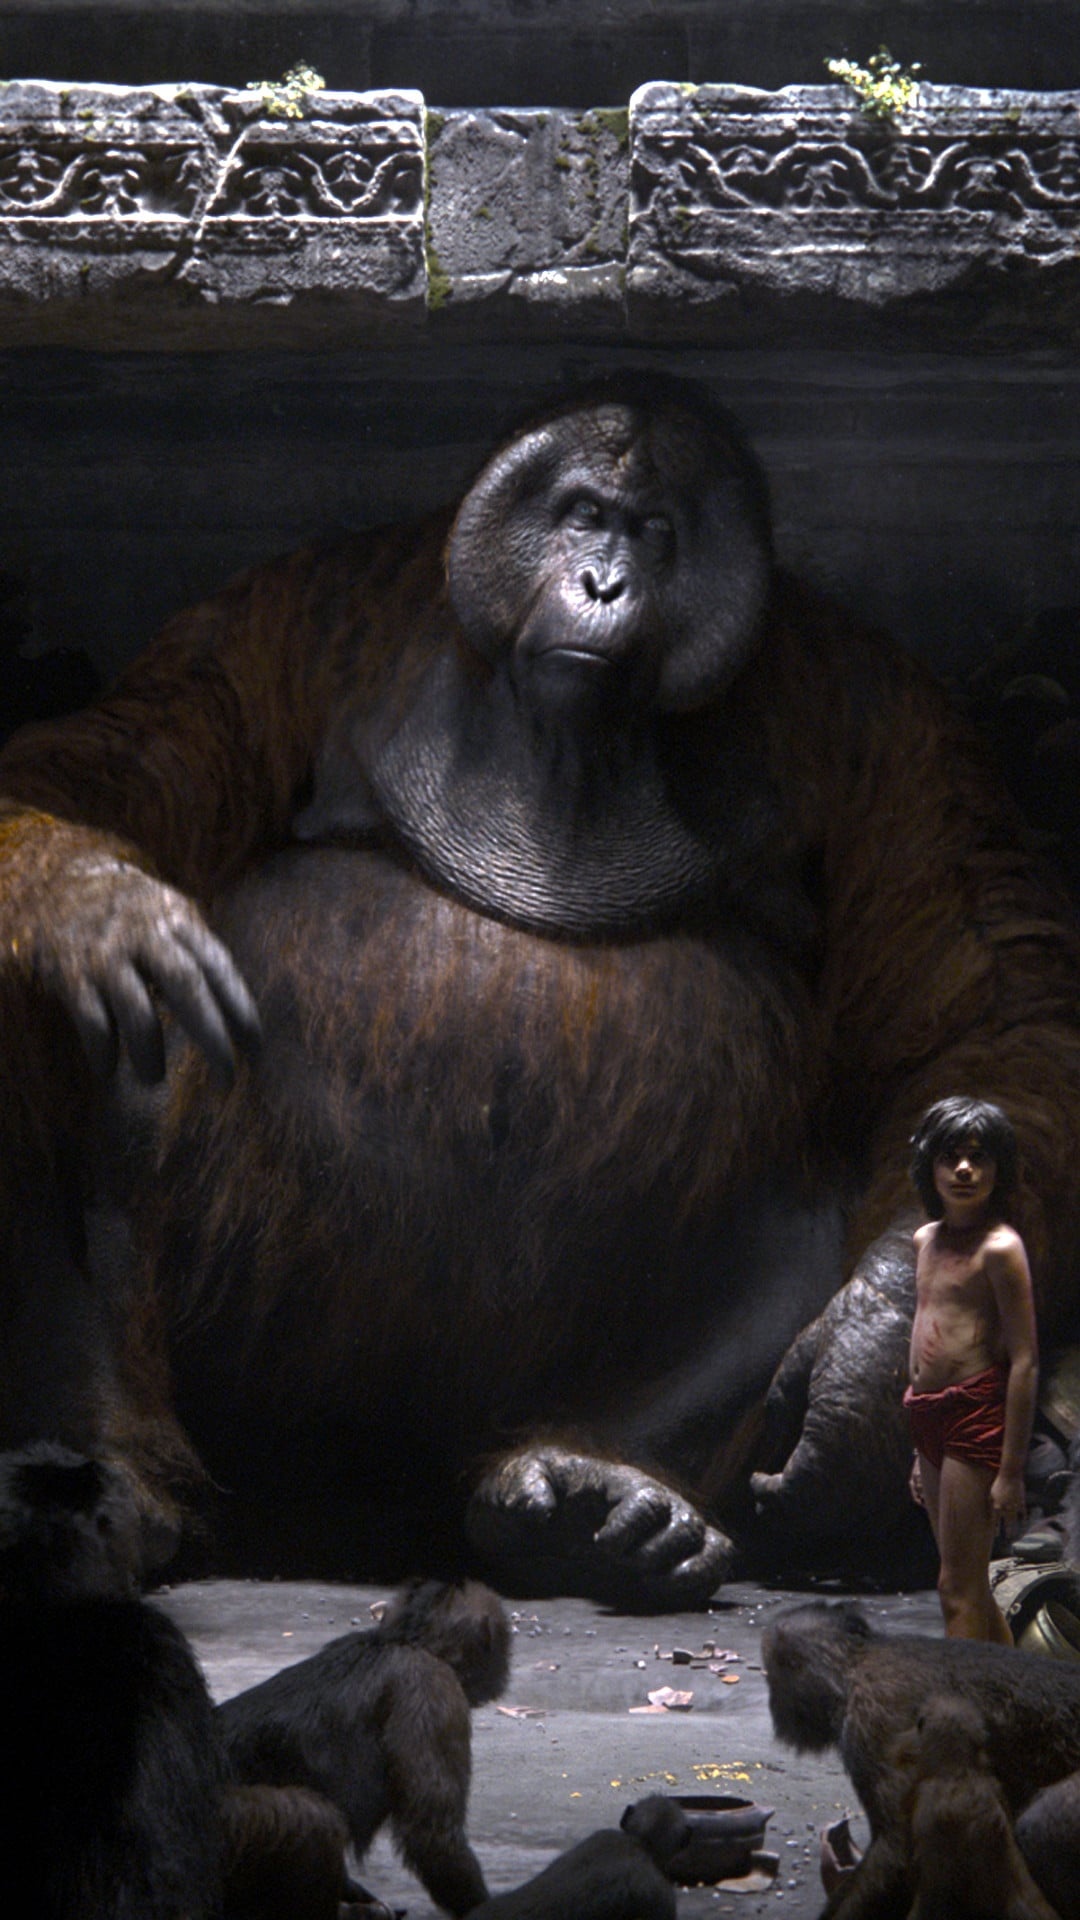 The Jungle Book movie, iPhone wallpapers, Adventure awaits, Enchanting journey, 1080x1920 Full HD Phone